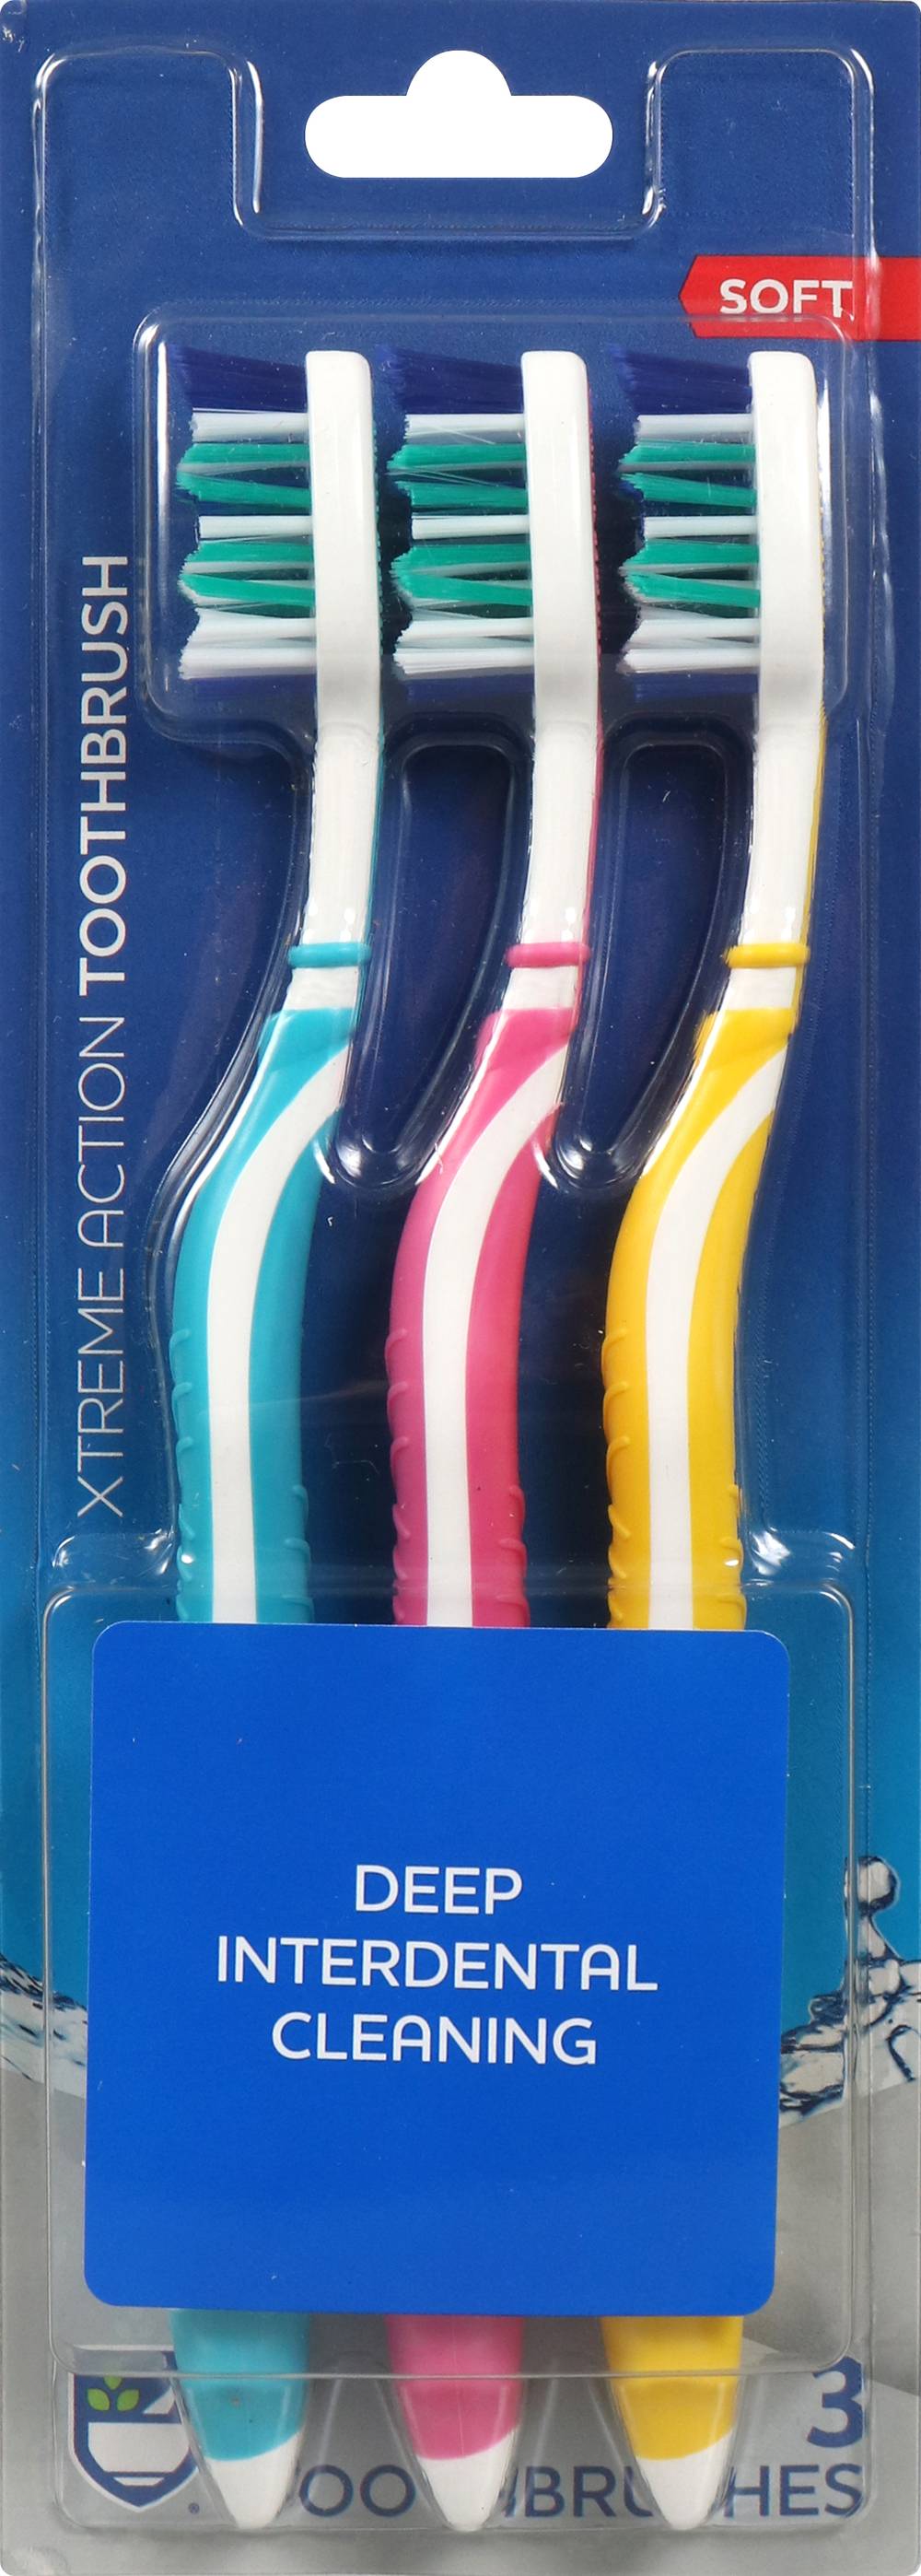 Rite Aid Oral Care Xtreme Action Soft Toothbrushes